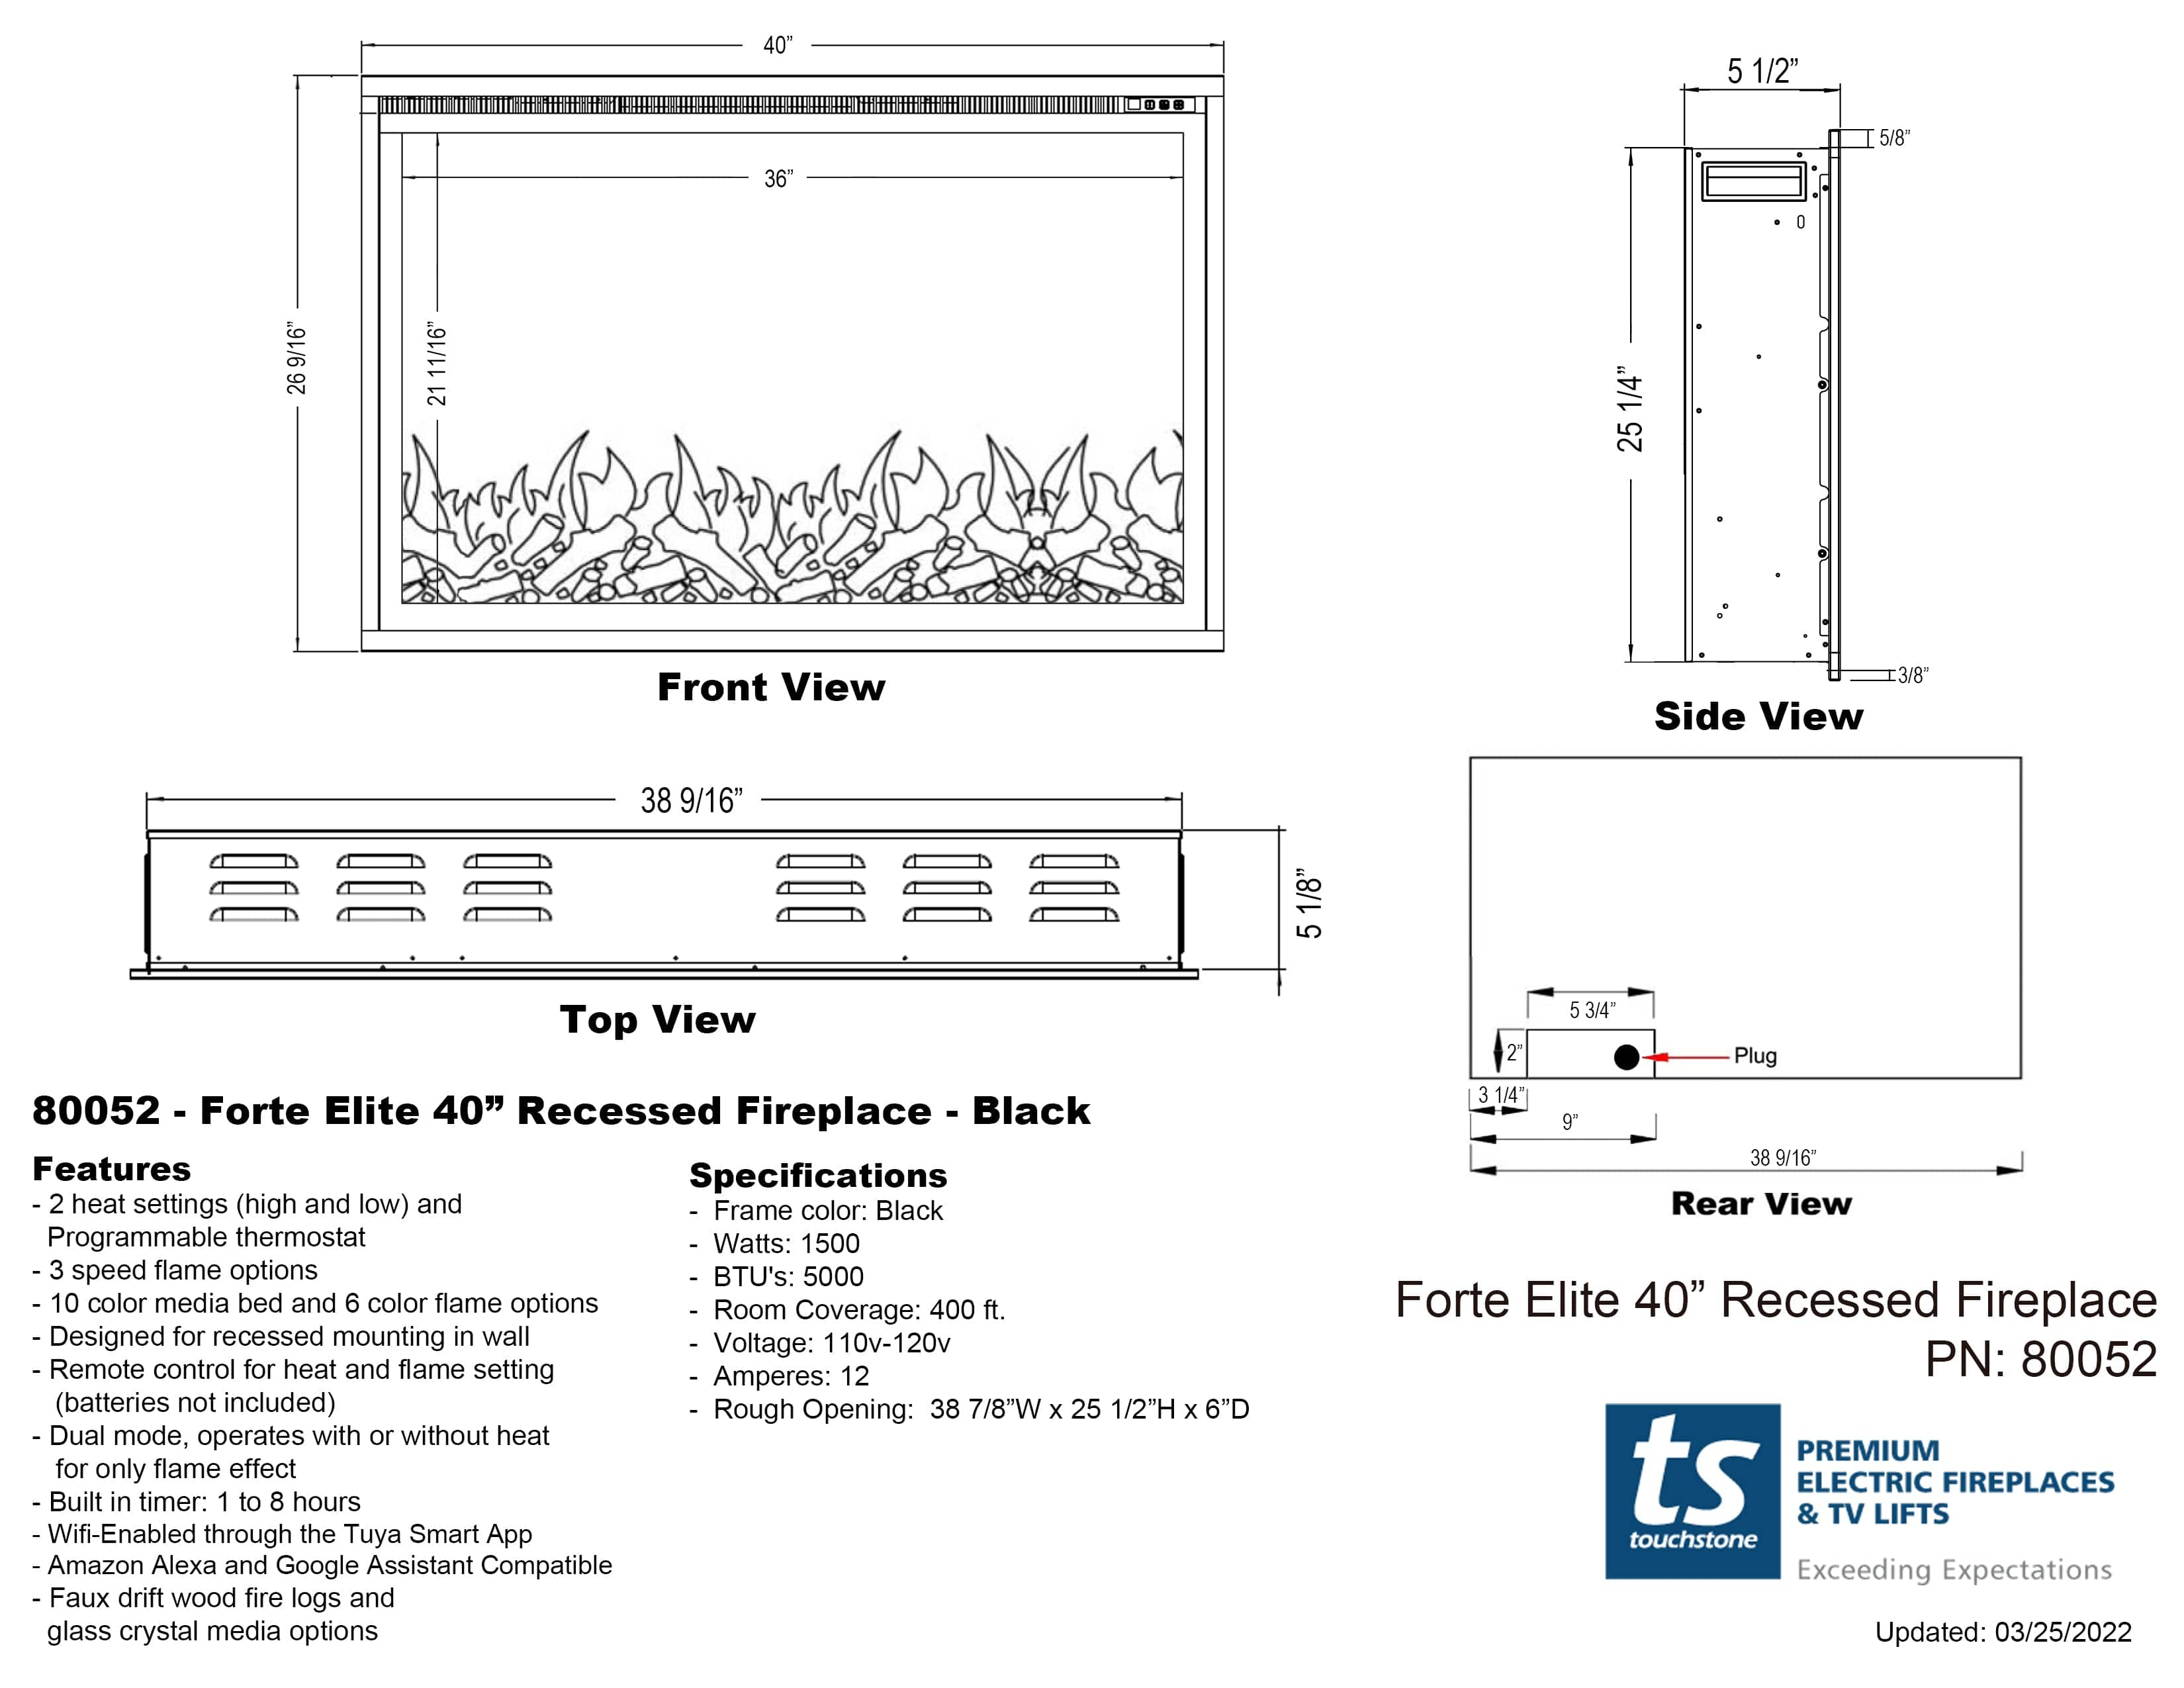 Touchstone Sideline Elite Forte 40 inch Electric Fireplace specifications